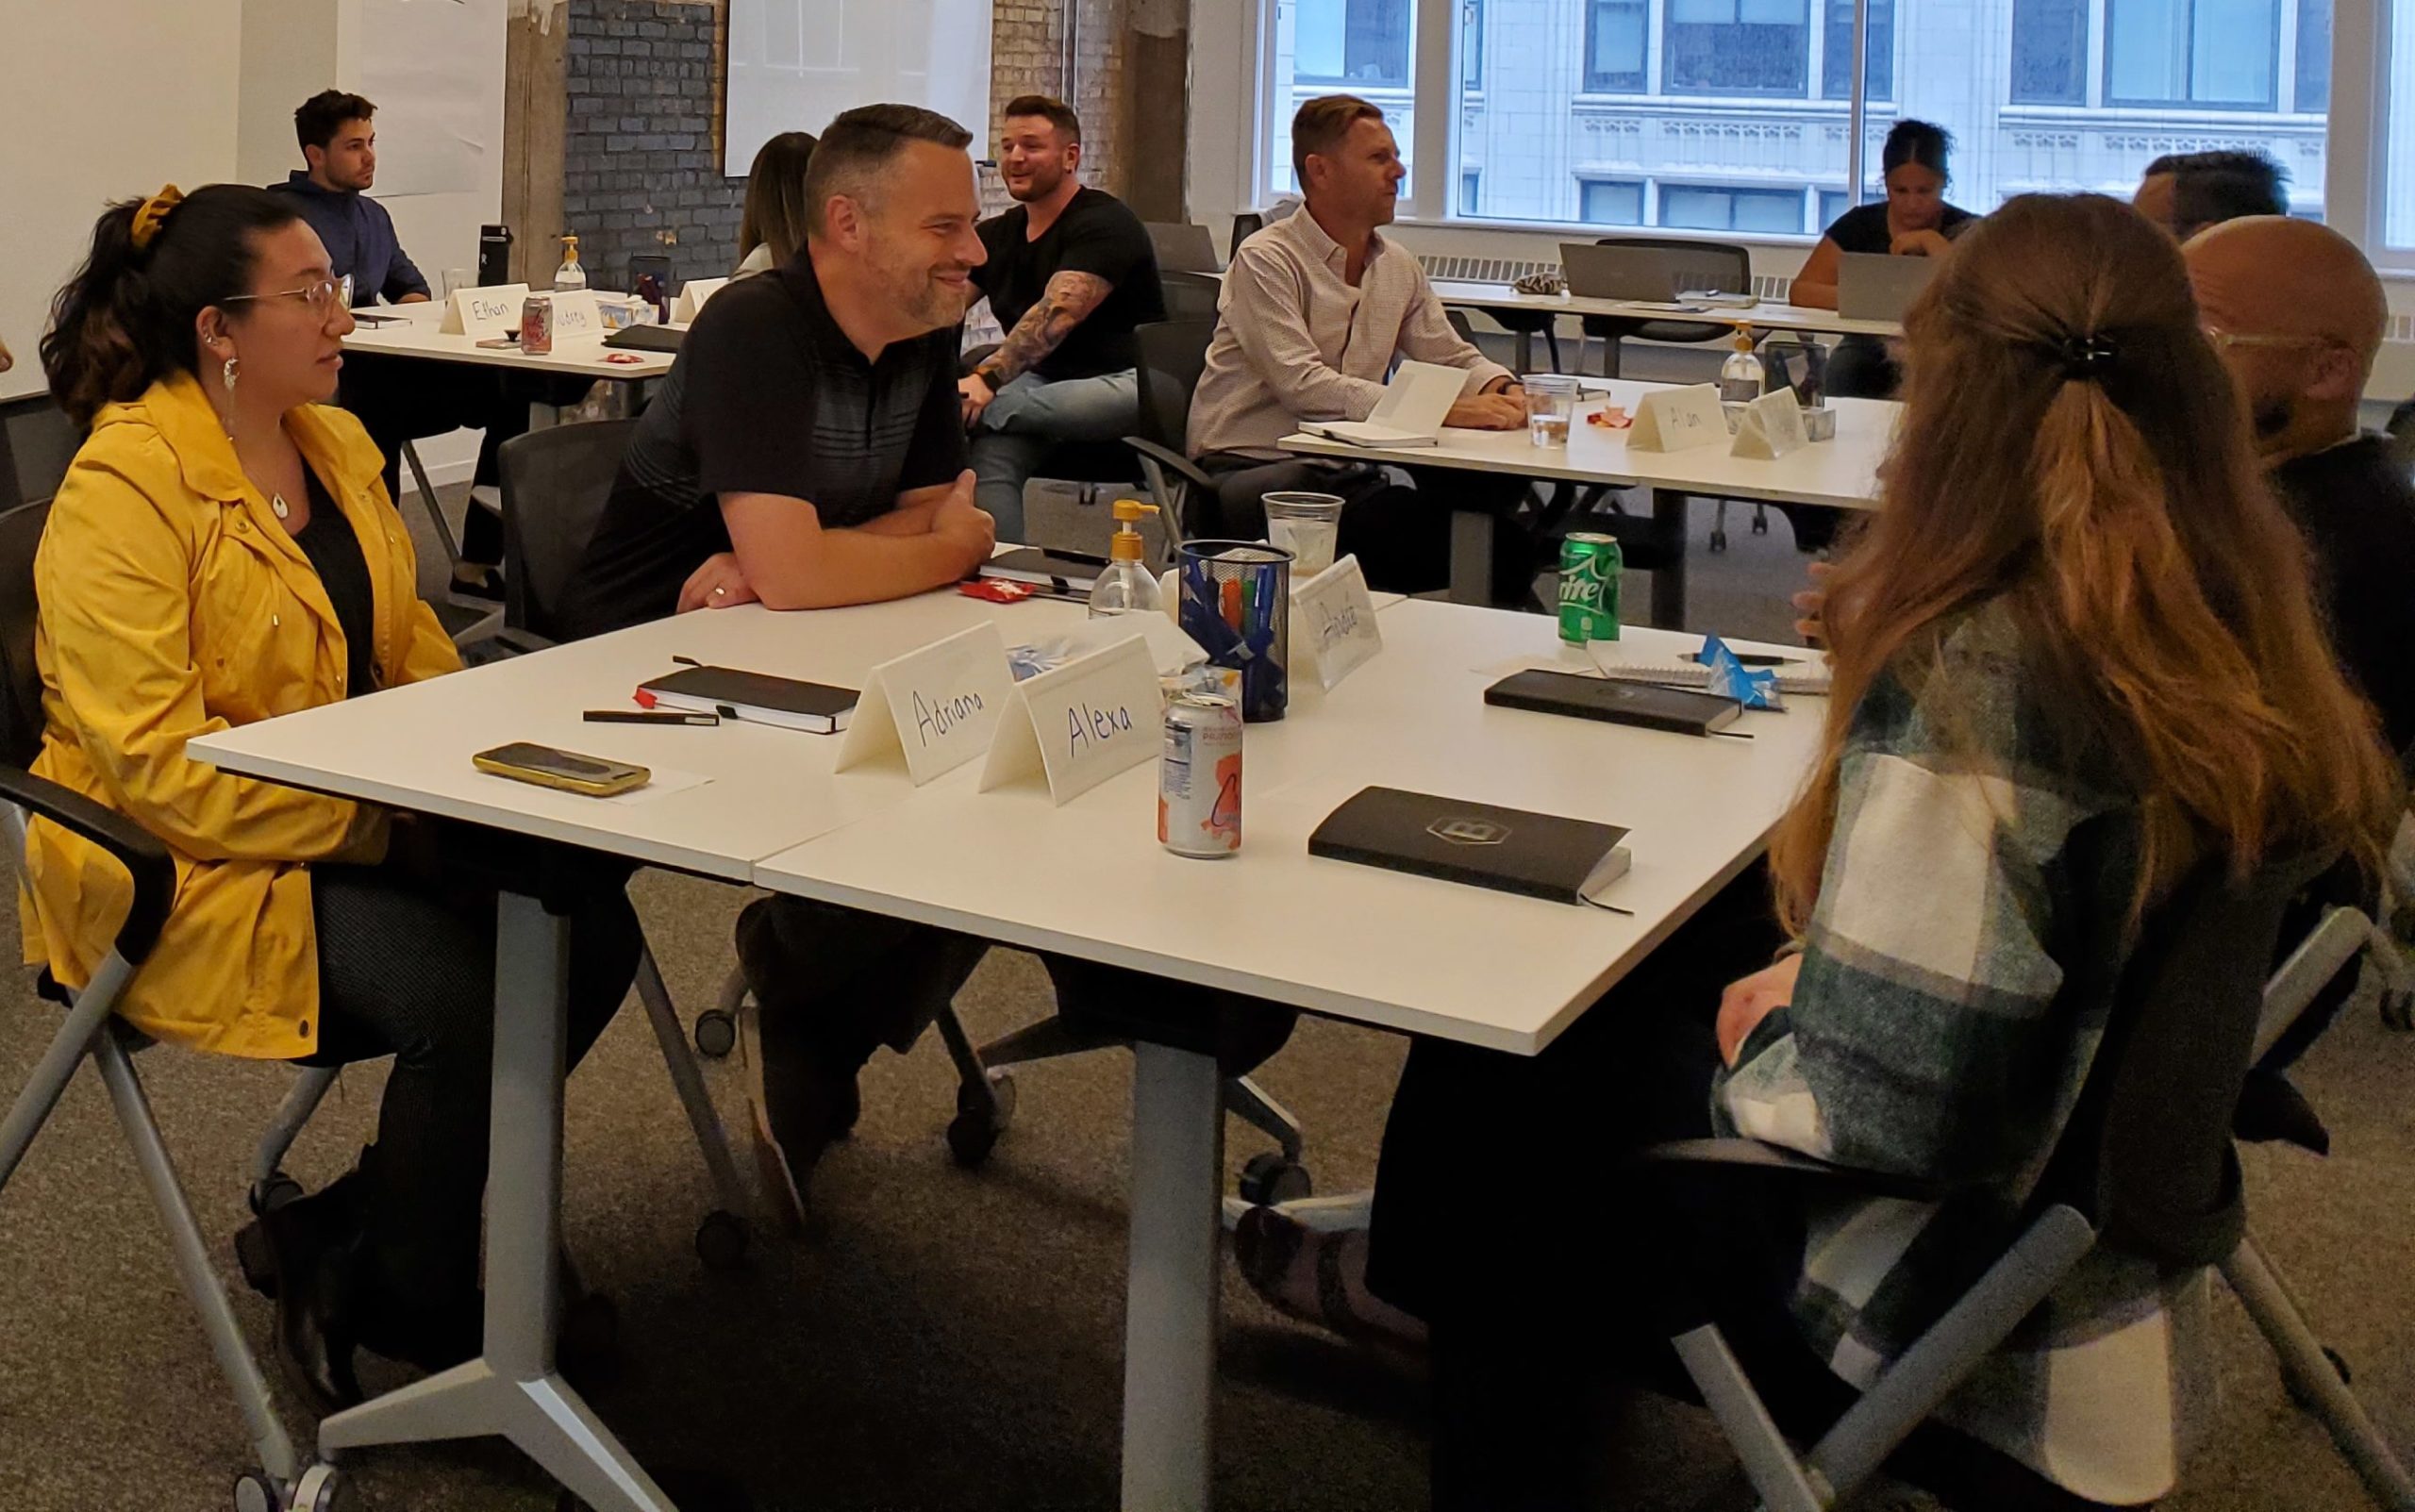 Blog post author Eric Nelson and others at Basis Technologies' August 2022 New Hire Orientation